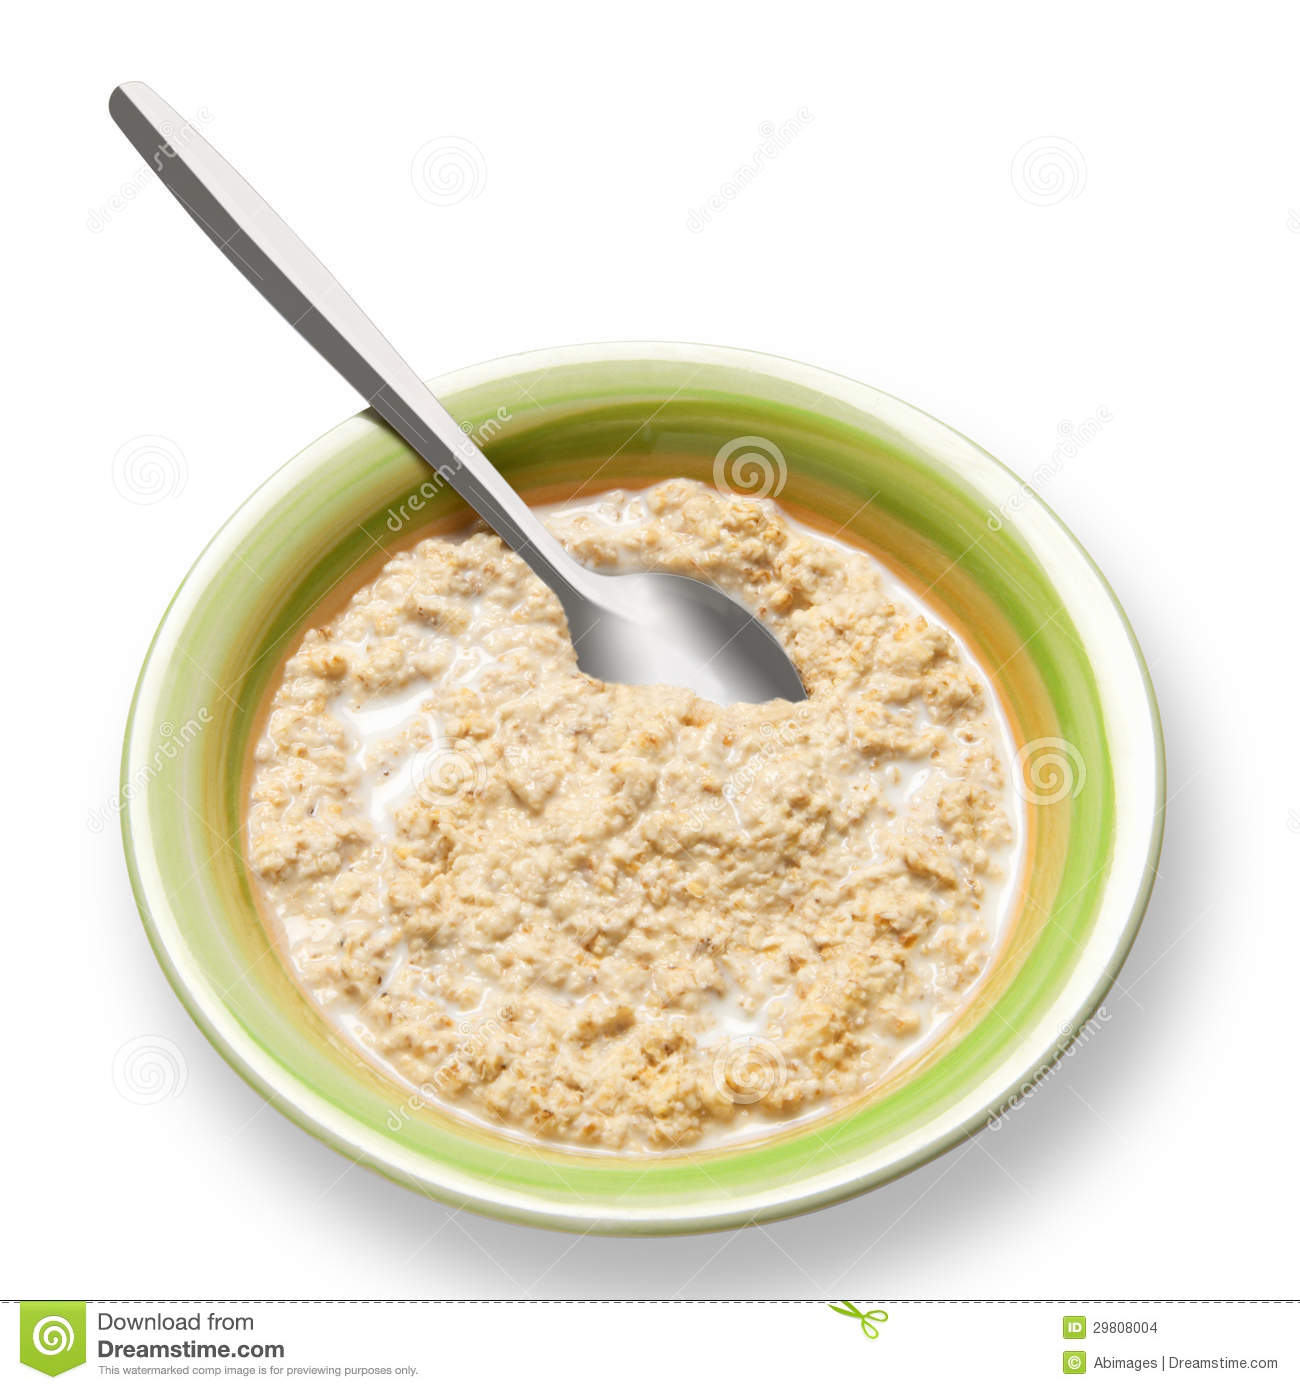     Oats With Spoon Isolated On White With Path Mr No Pr No 4 1073 11